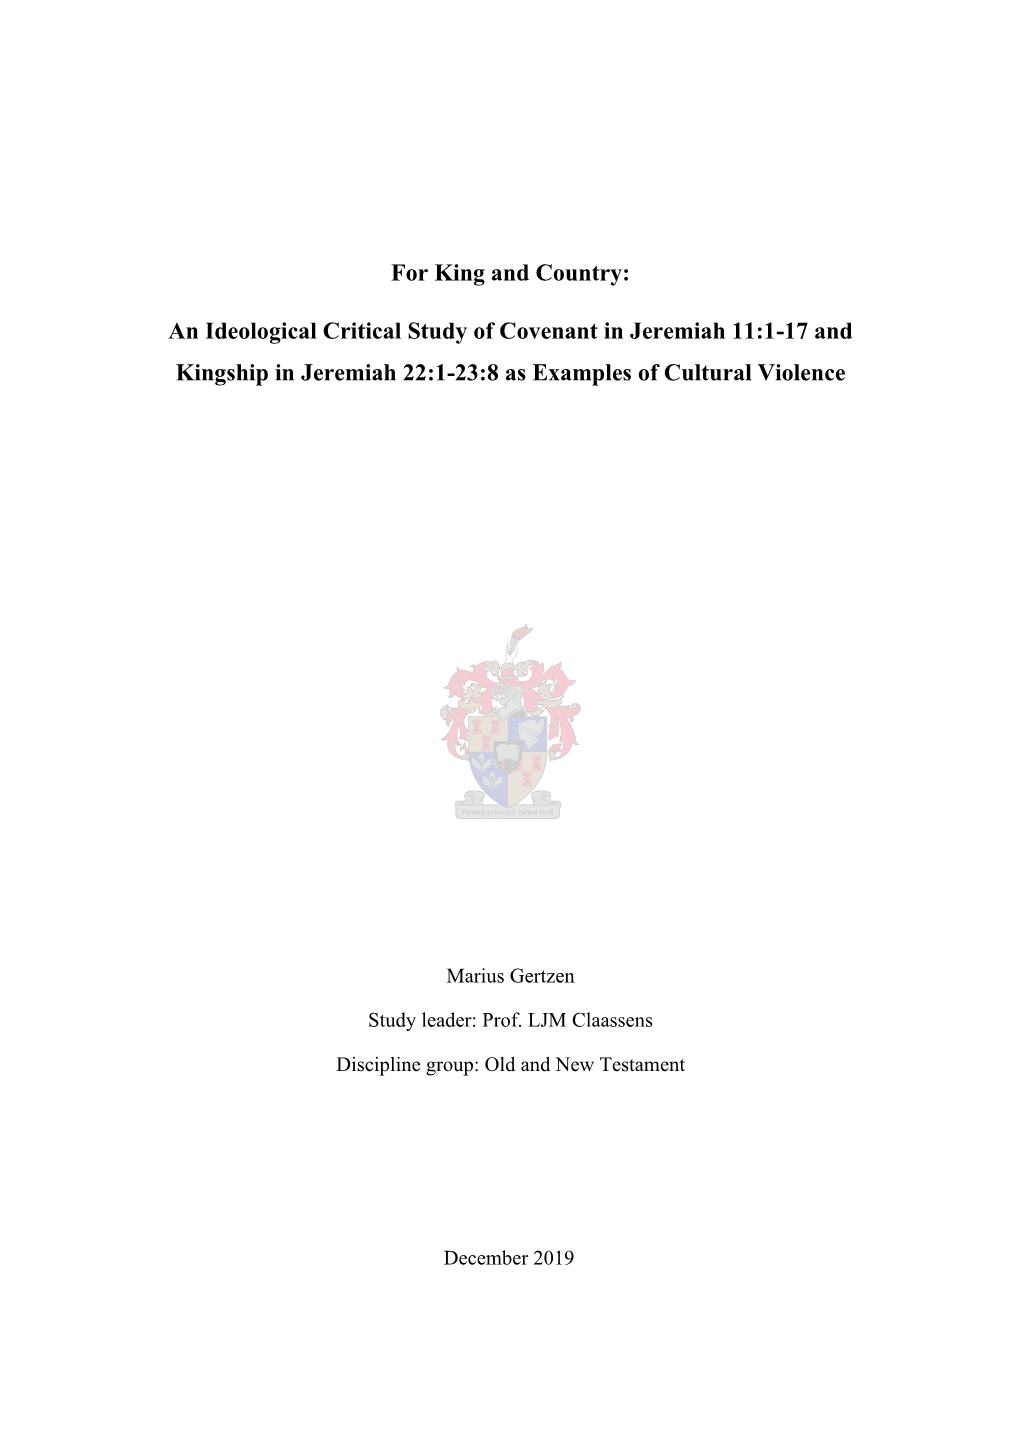 For King and Country: an Ideological Critical Study of Covenant In